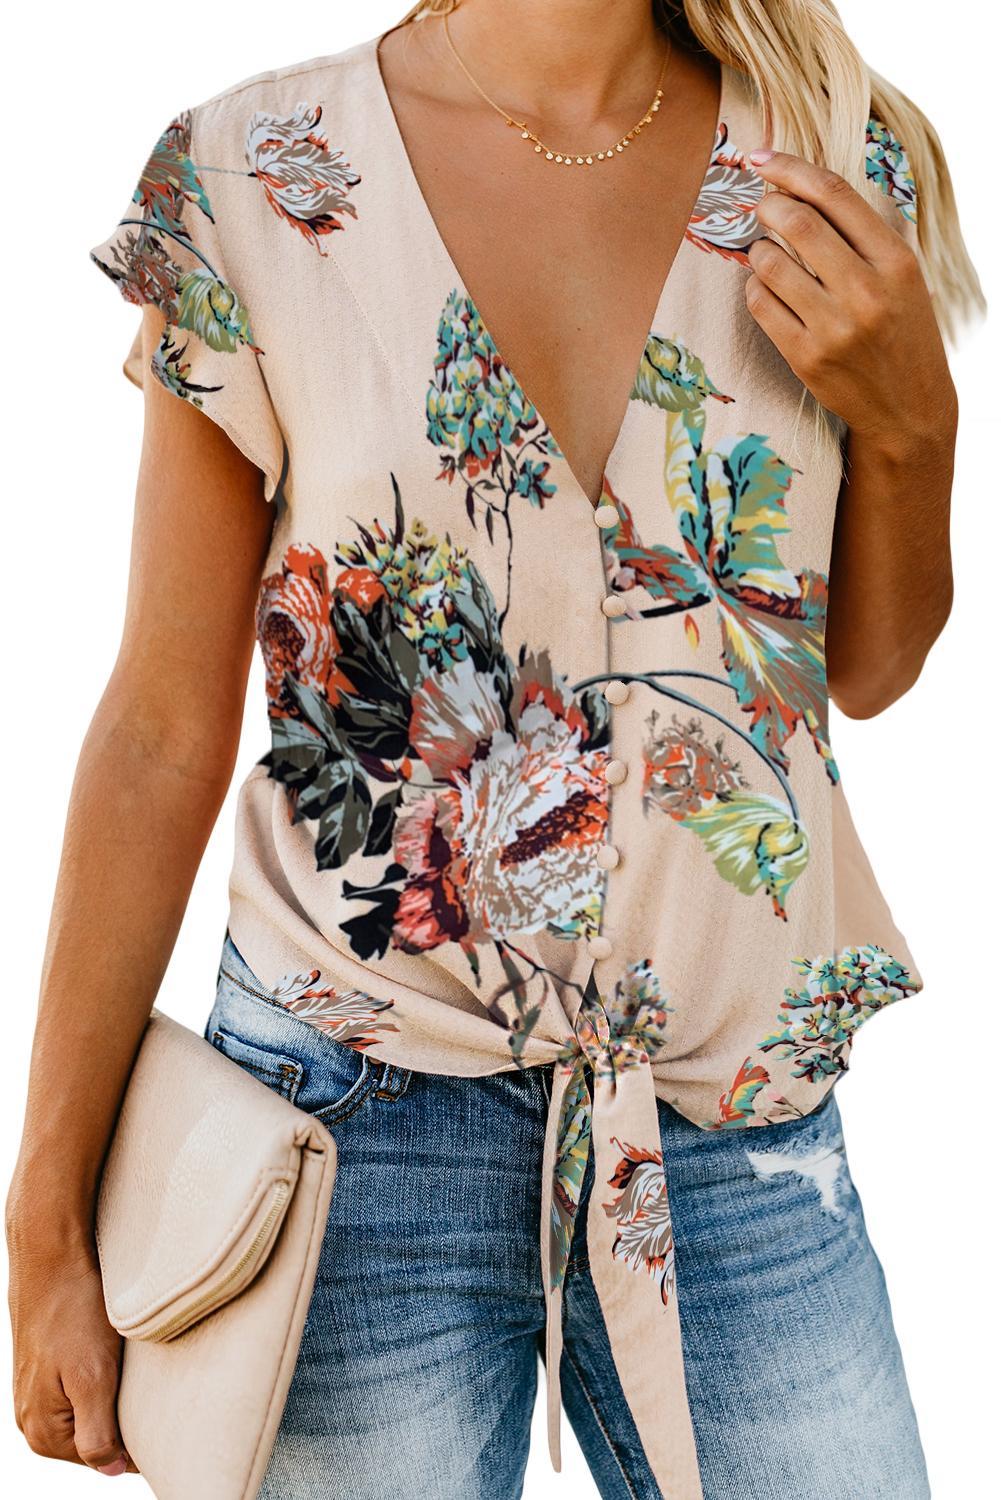 $ 19.99 - Asvivid Womens Floral Printed Button Down V-Neck Tops Ruffle ...